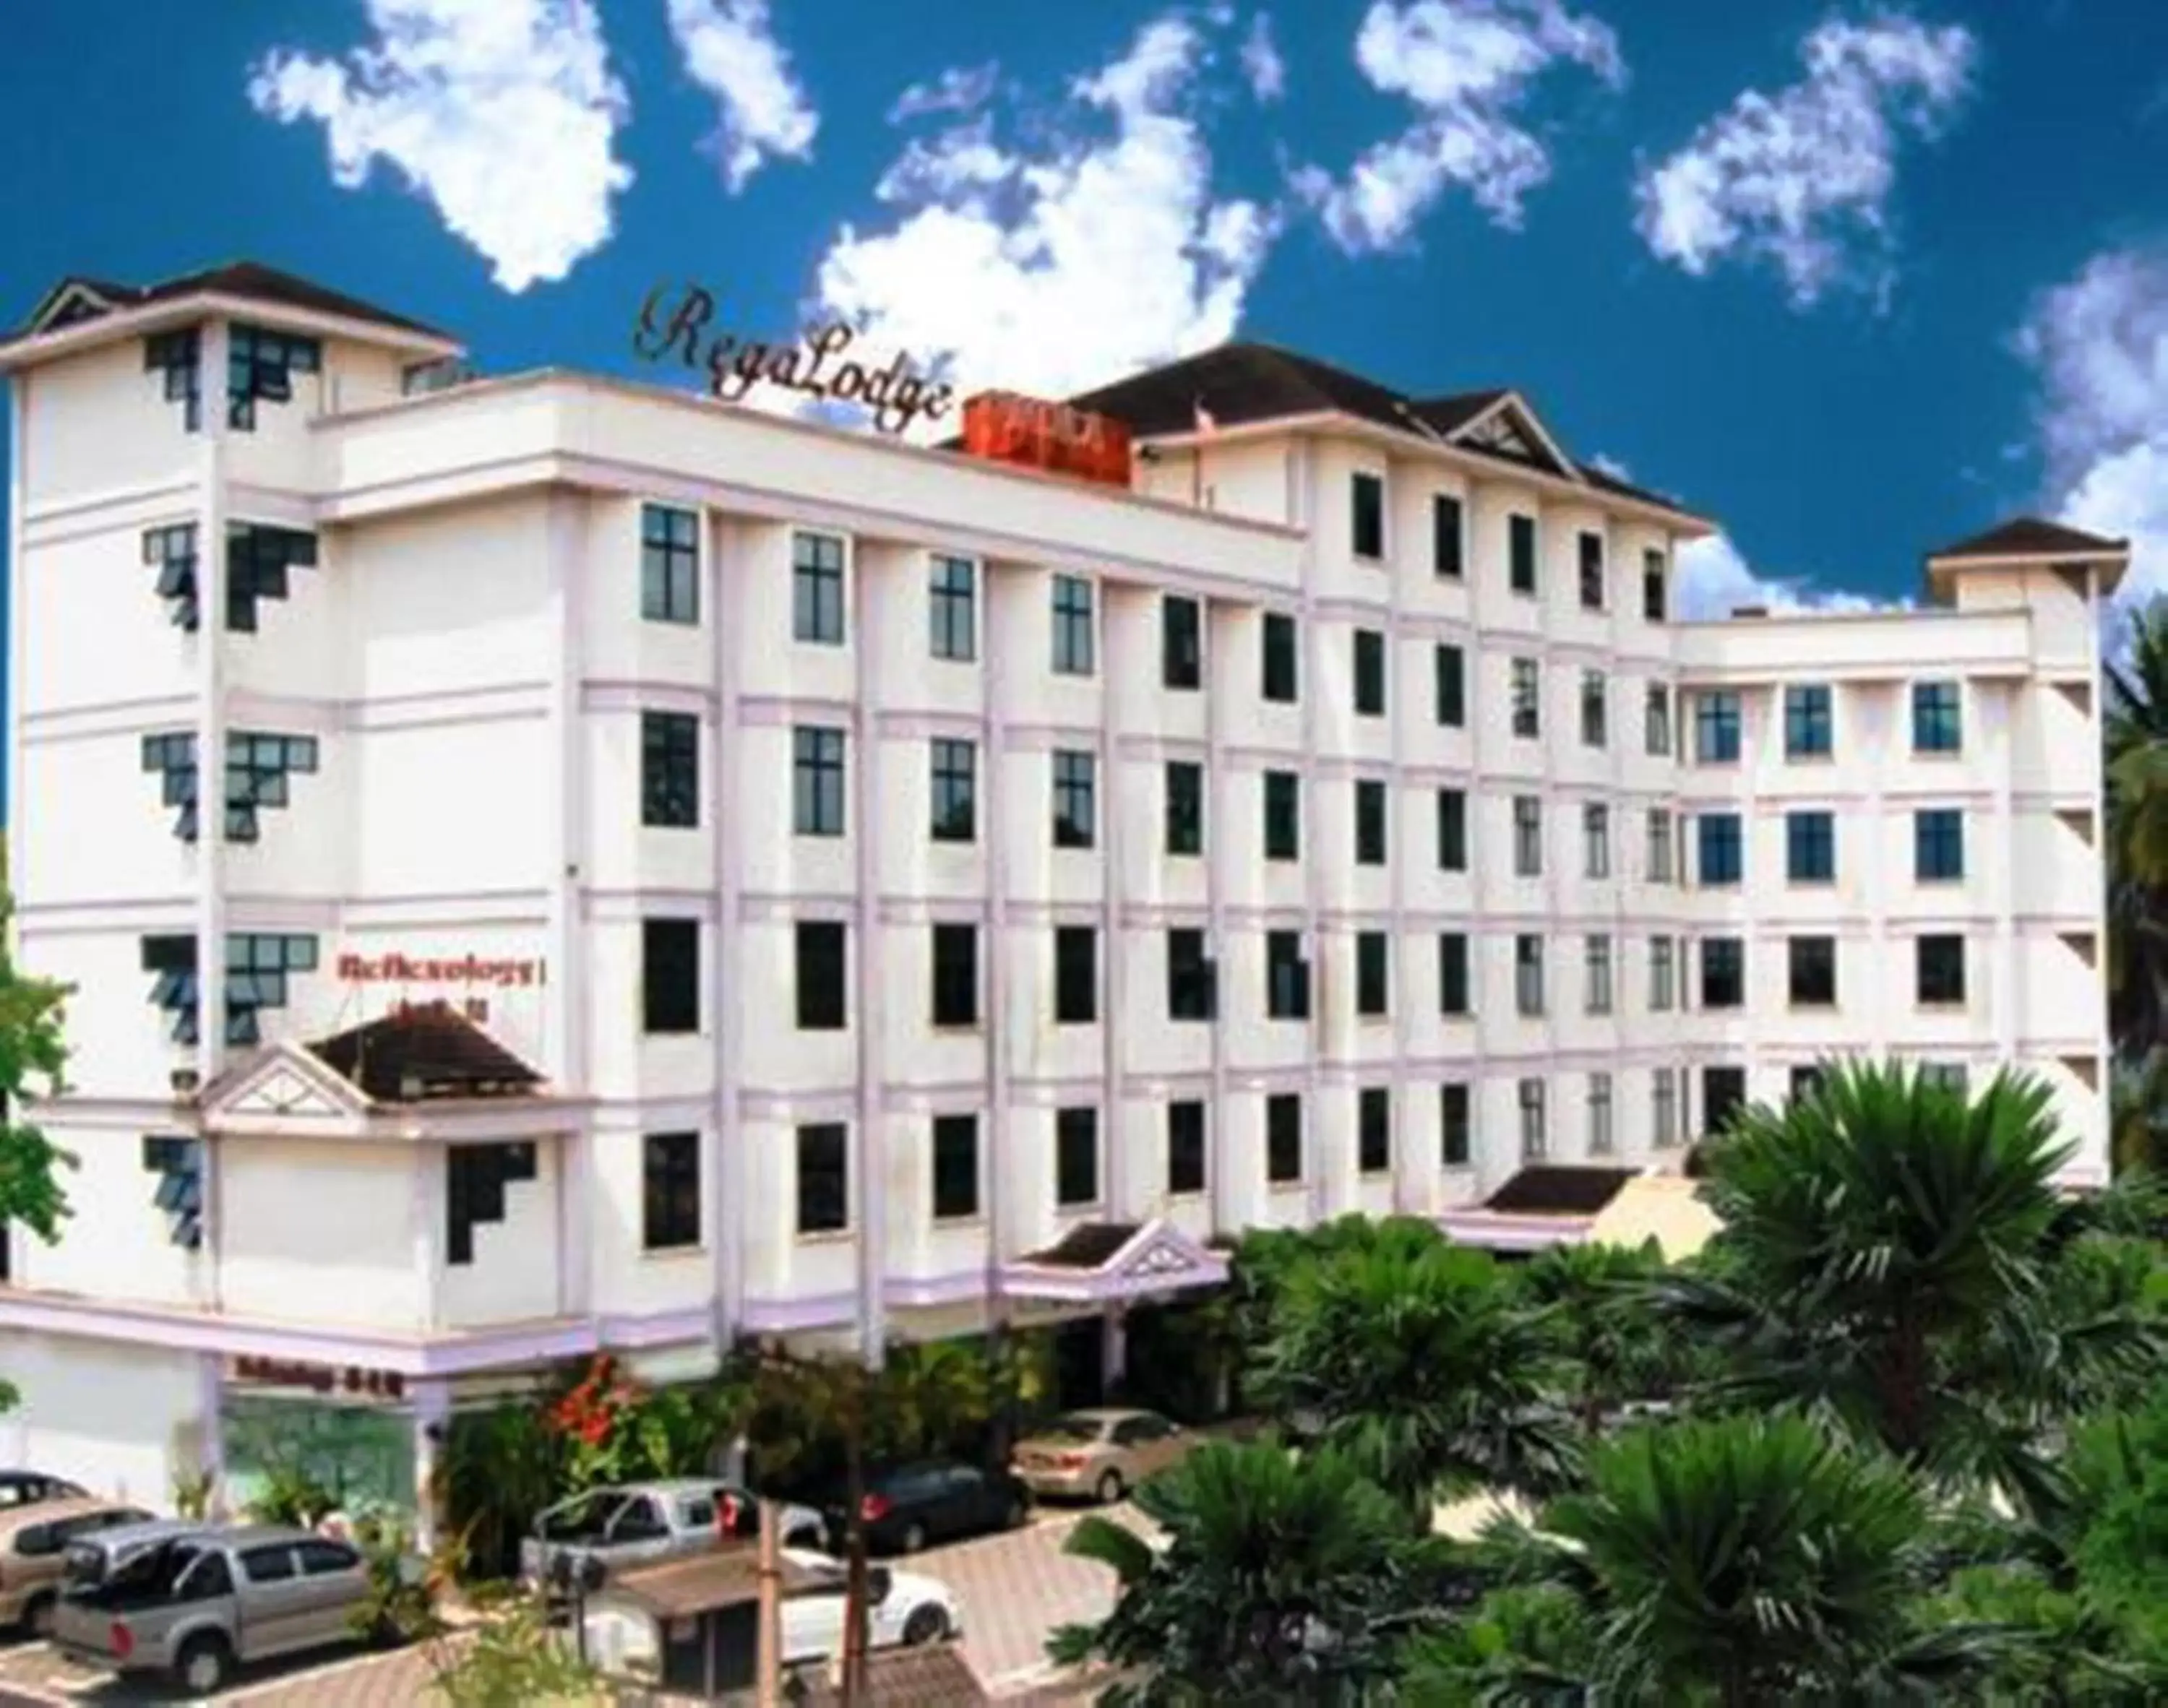 Property Building in Regalodge Hotel Ipoh